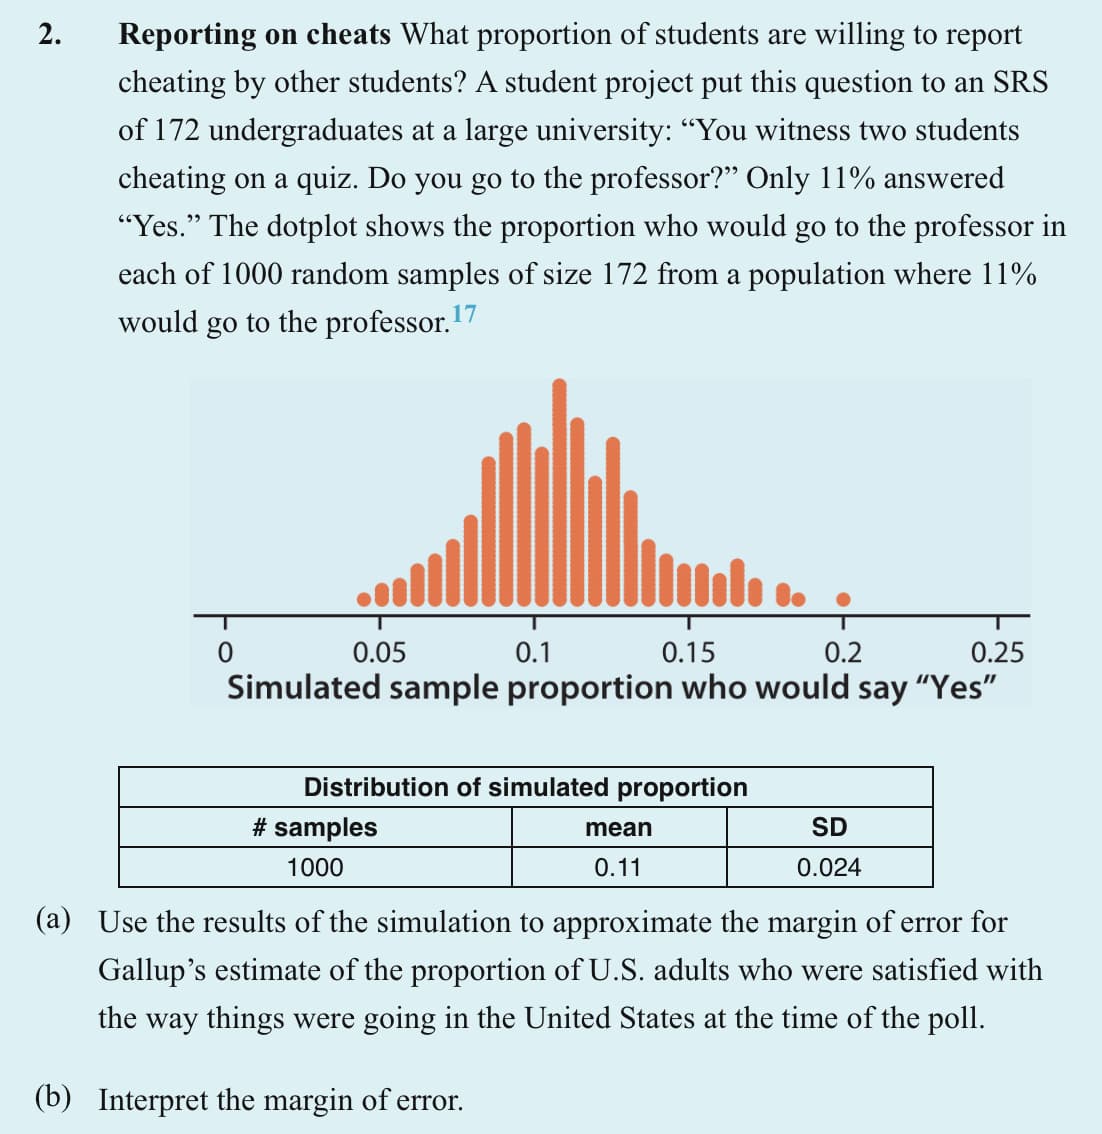 2.
Reporting on cheats What proportion of students are willing to report
cheating by other students? A student project put this question to an SRS
of 172 undergraduates at a large university: "You witness two students
cheating on a quiz. Do you go to the professor?" Only 11% answered
"Yes." The dotplot shows the proportion who would go to the professor in
each of 1000 random samples of size 172 from a population where 11%
would go to the professor. 17
0.1
0.15
0.2
0.25
Simulated sample proportion who would say "Yes"
0
0.05
Distribution of simulated proportion
# samples
1000
mean
0.11
SD
0.024
(a) Use the results of the simulation to approximate the margin of error for
Gallup's estimate of the proportion of U.S. adults who were satisfied with
the way things were going in the United States at the time of the poll.
(b) Interpret the margin of error.